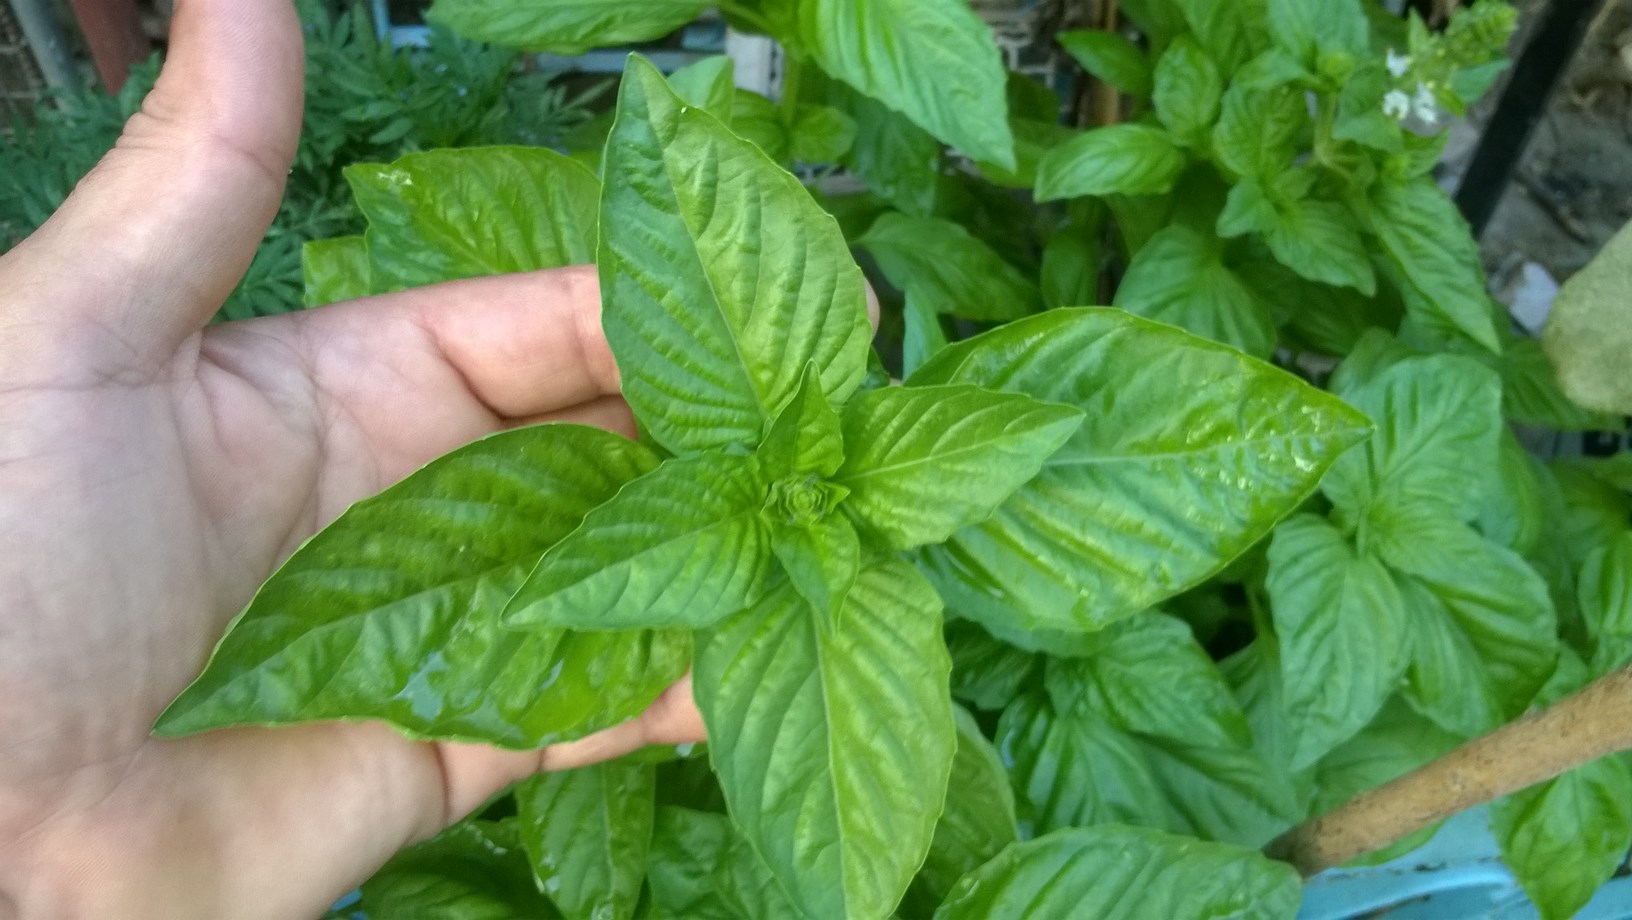 you can enjoy the aroma of basil by running your hands over the small leaves.